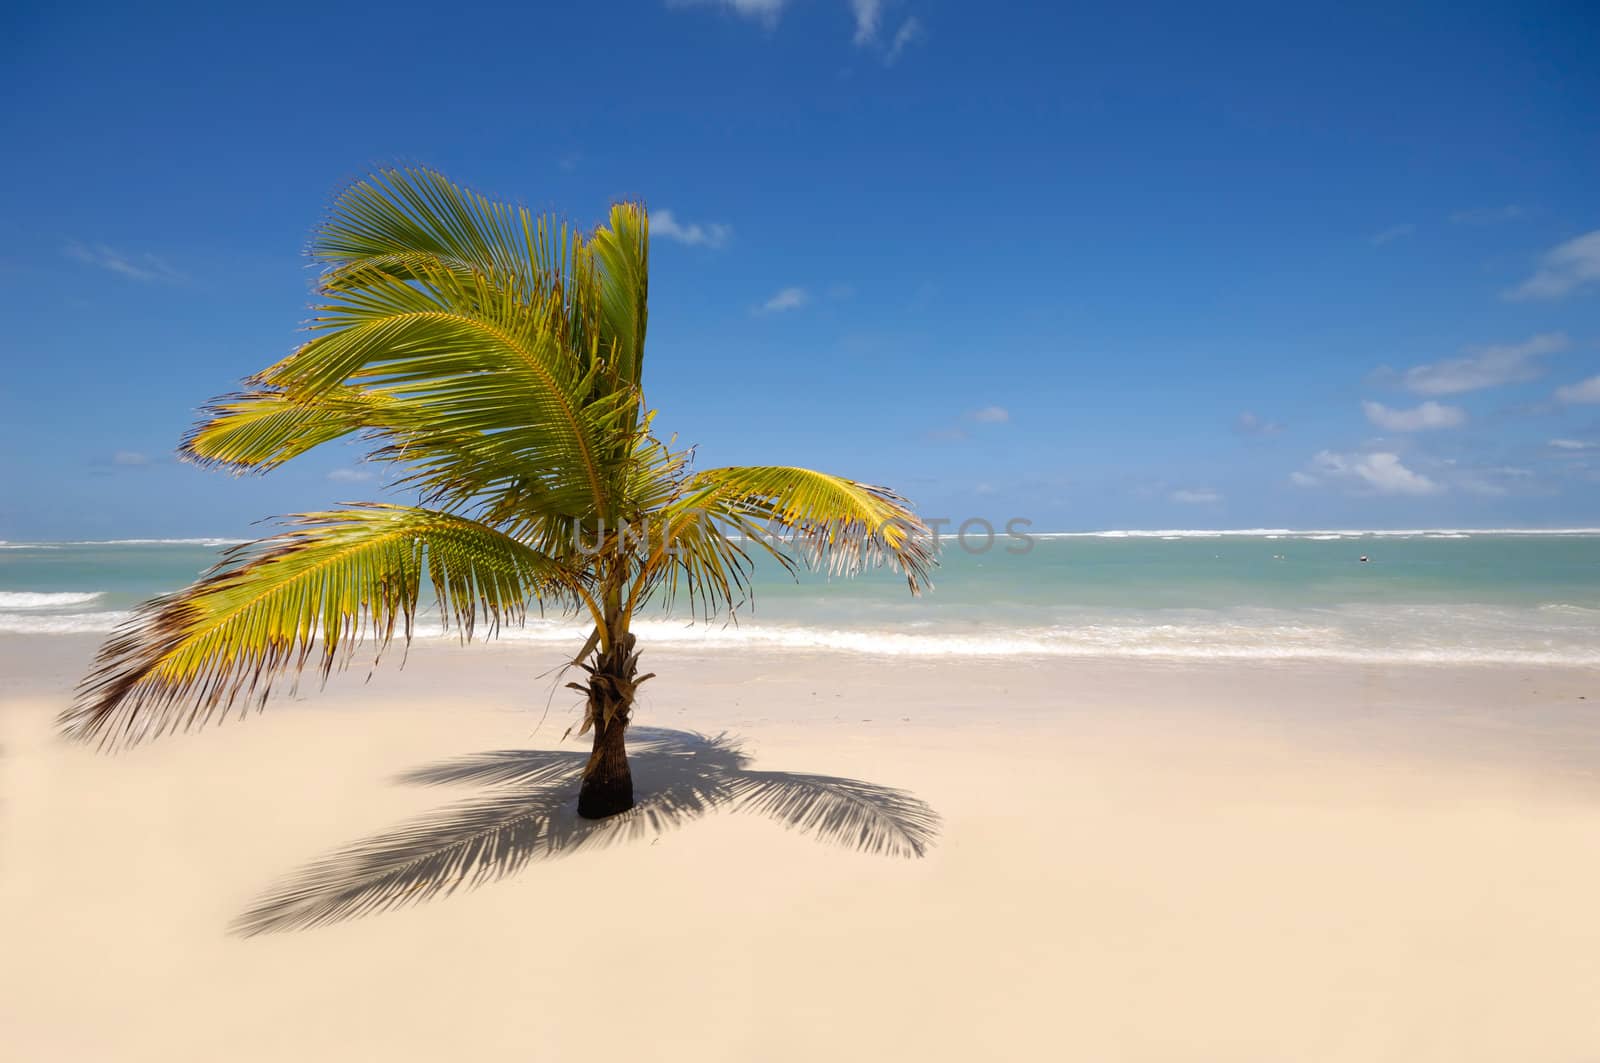 Exotic with palm and white sand with the coast in the background. The beach is from the Dominican Republic.